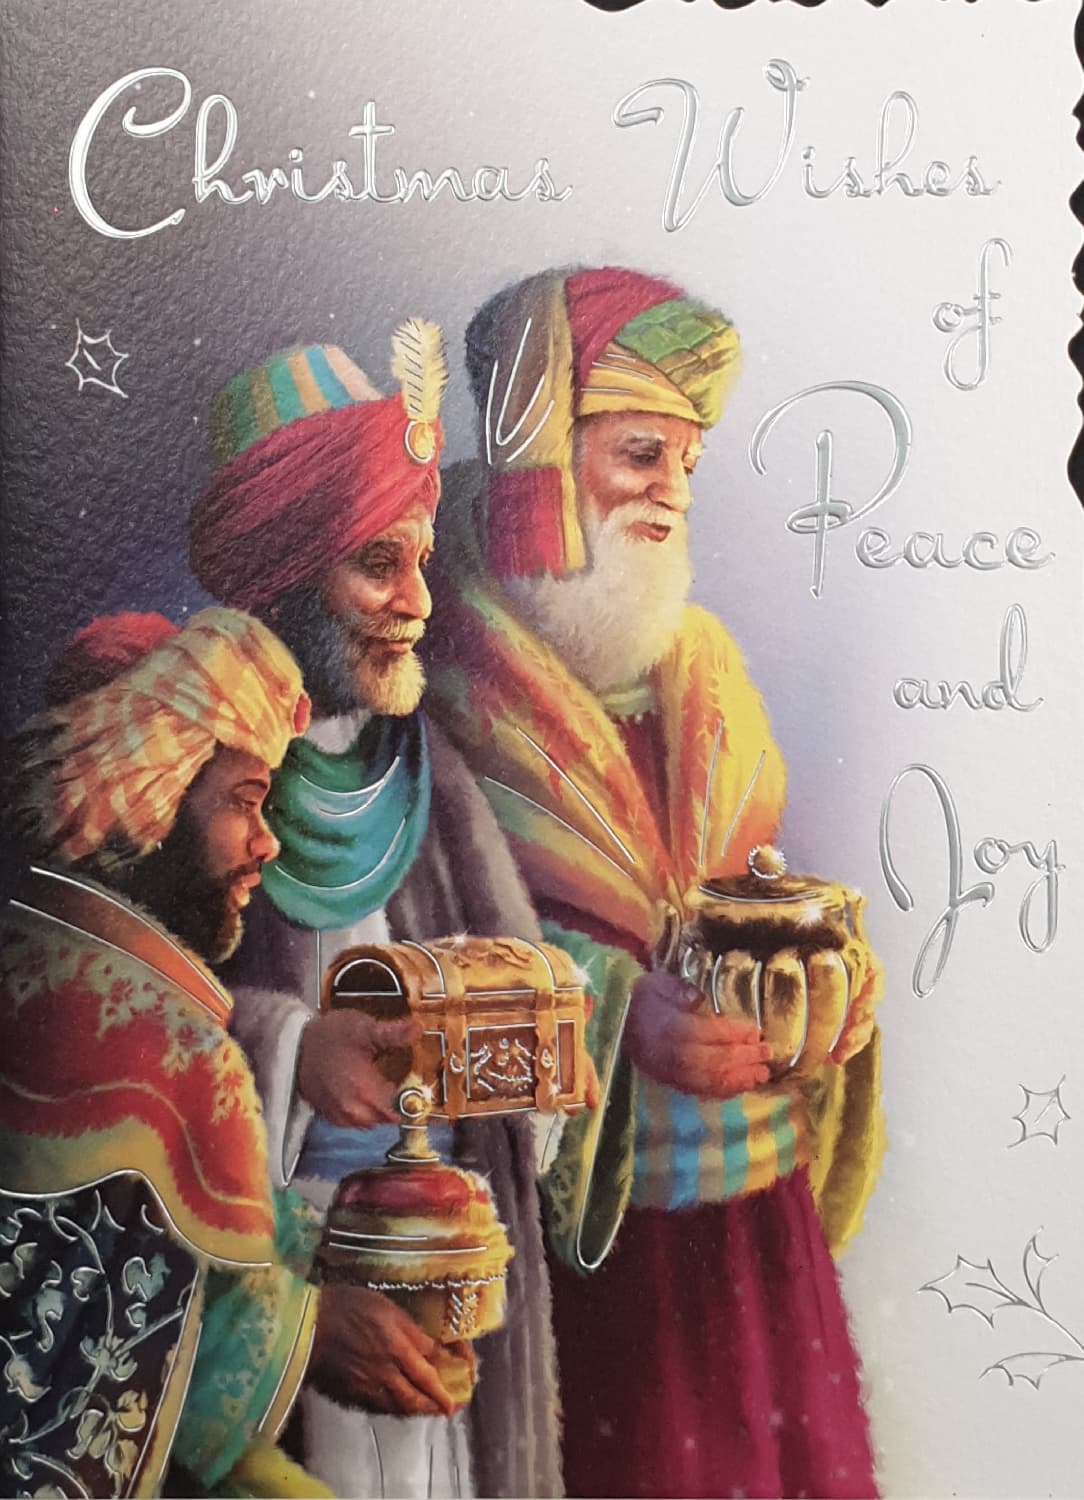 Religious Christmas Card - Peace & Joy / Three Kings Offering Gifts